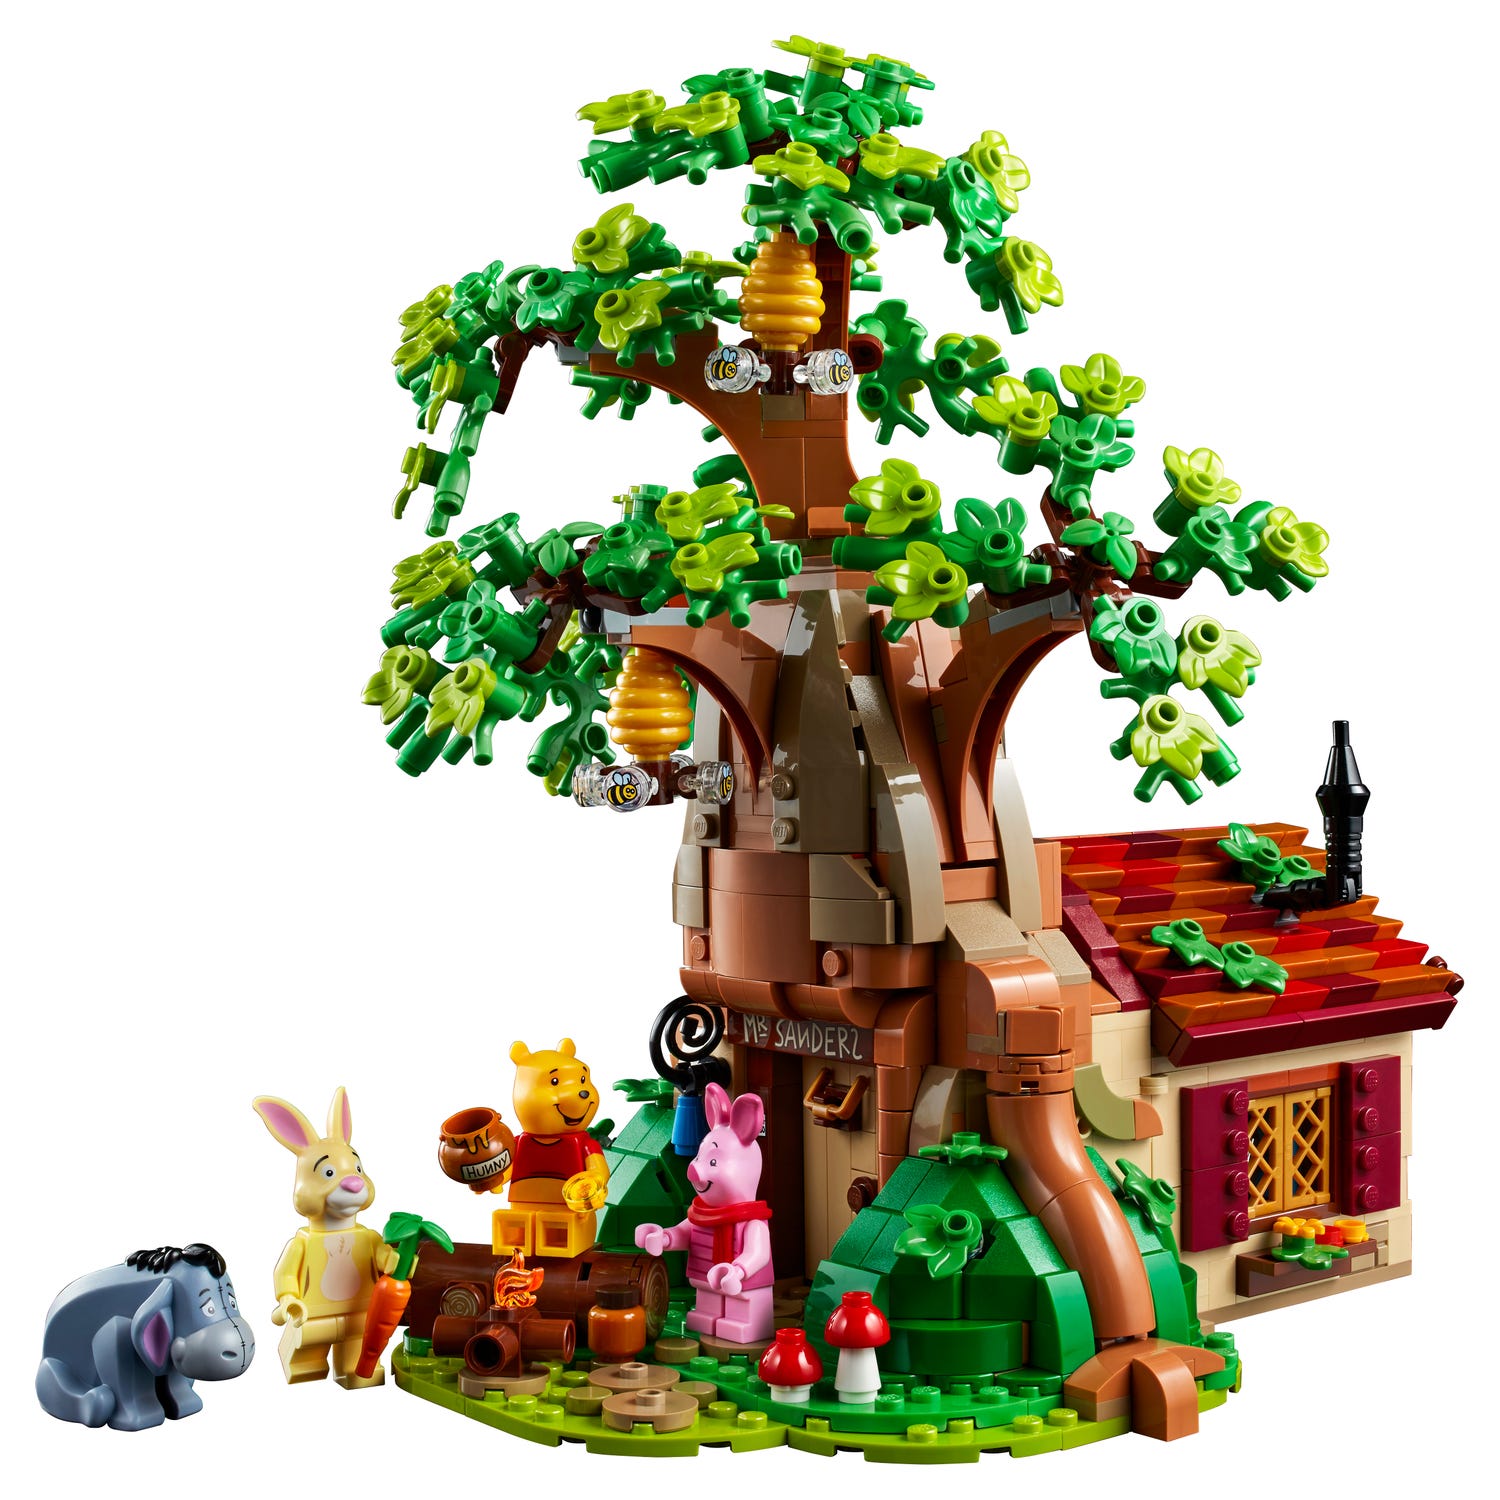 bal slecht spreker Winnie the Pooh 21326 | Disney™ | Buy online at the Official LEGO® Shop US